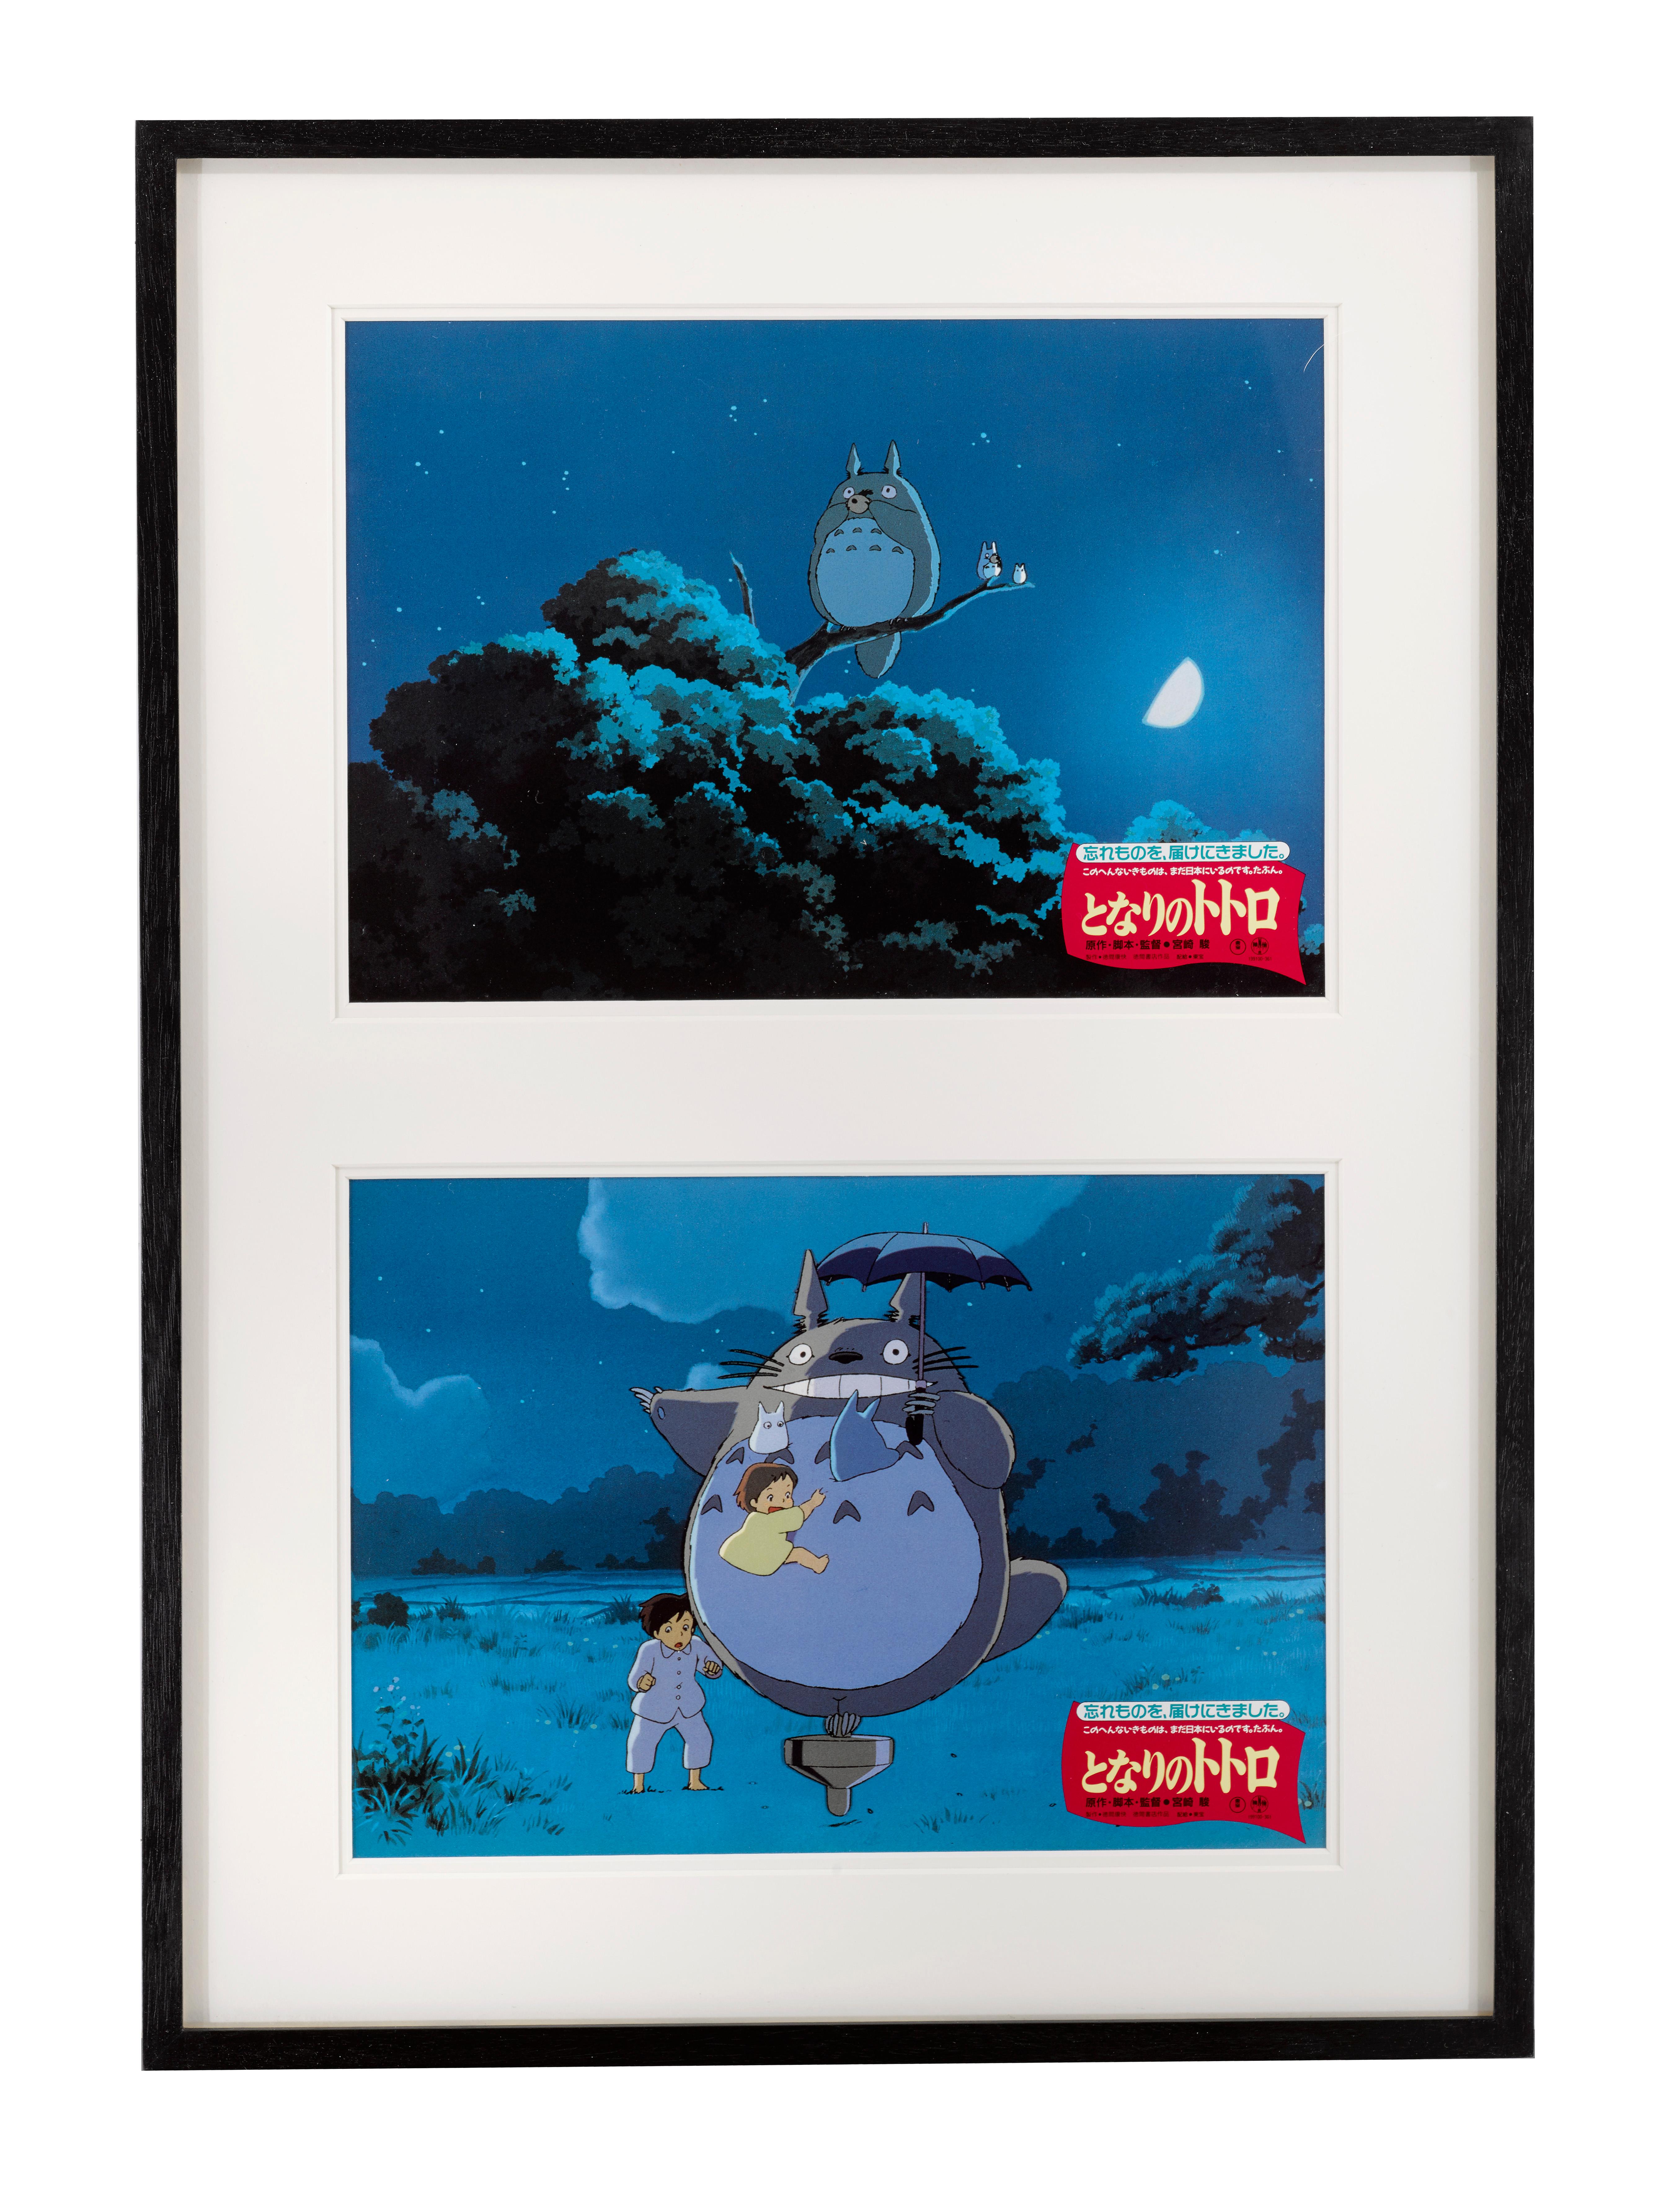 Two original Japanese lobby cards poster for the 1988 studio Ghibli animation.
Hayao Miyazaki, one of the founders of Studio Ghibli, wrote and directed this film. Studio Ghibli, which was founded in 1985, has been responsible for making so many